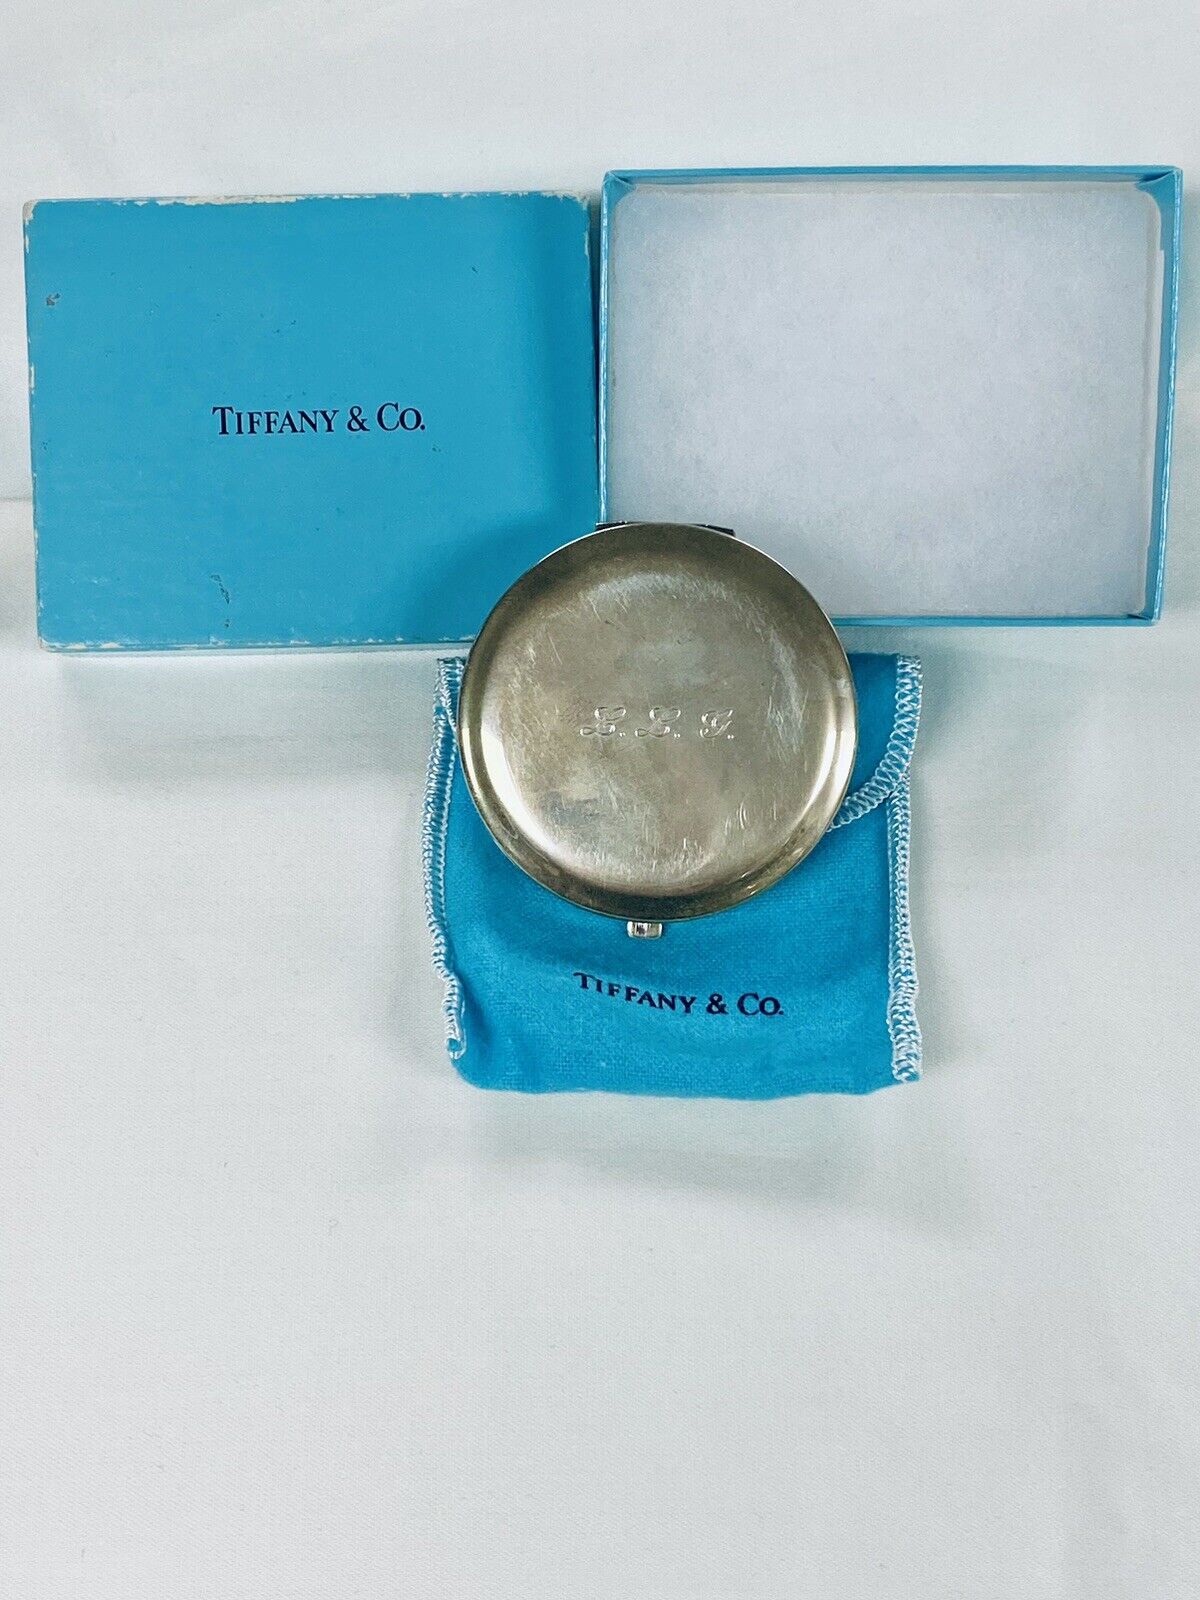 Vintage Tiffany & Co. Silver Rounded Compact With Mirror, Never Had Powder